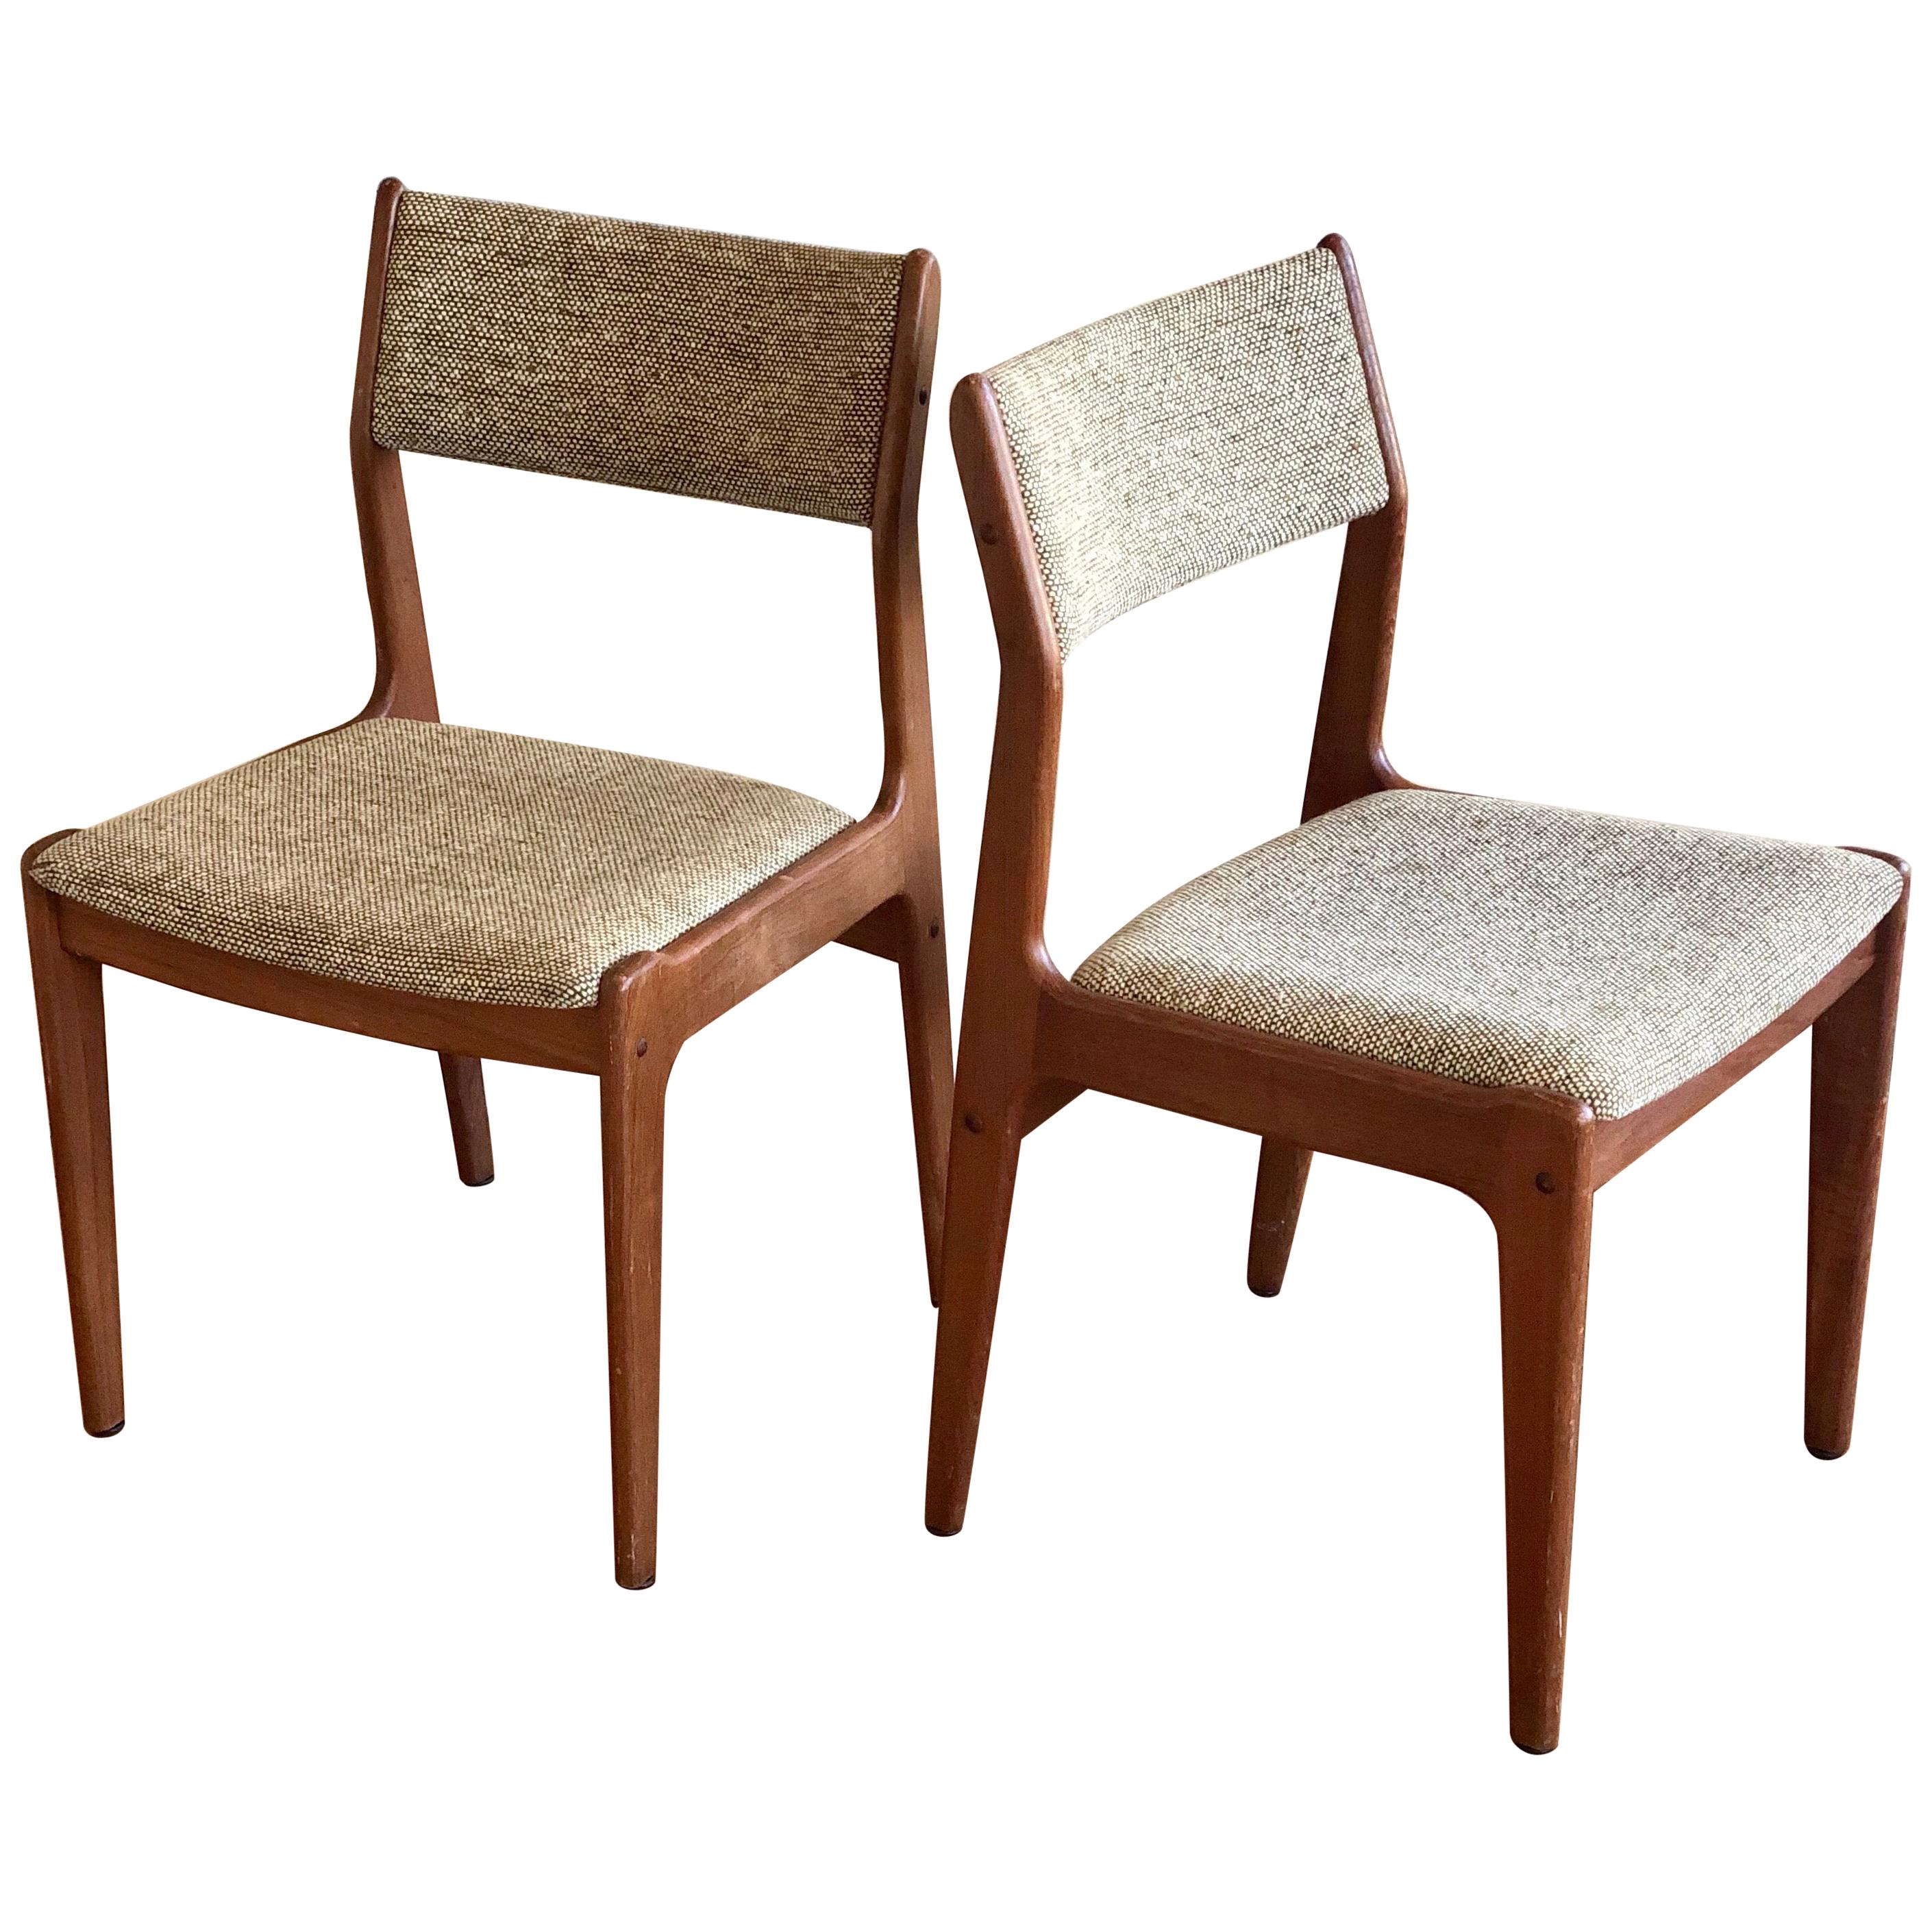 Pair of Danish Modern Teak Dining Chairs by D Scan